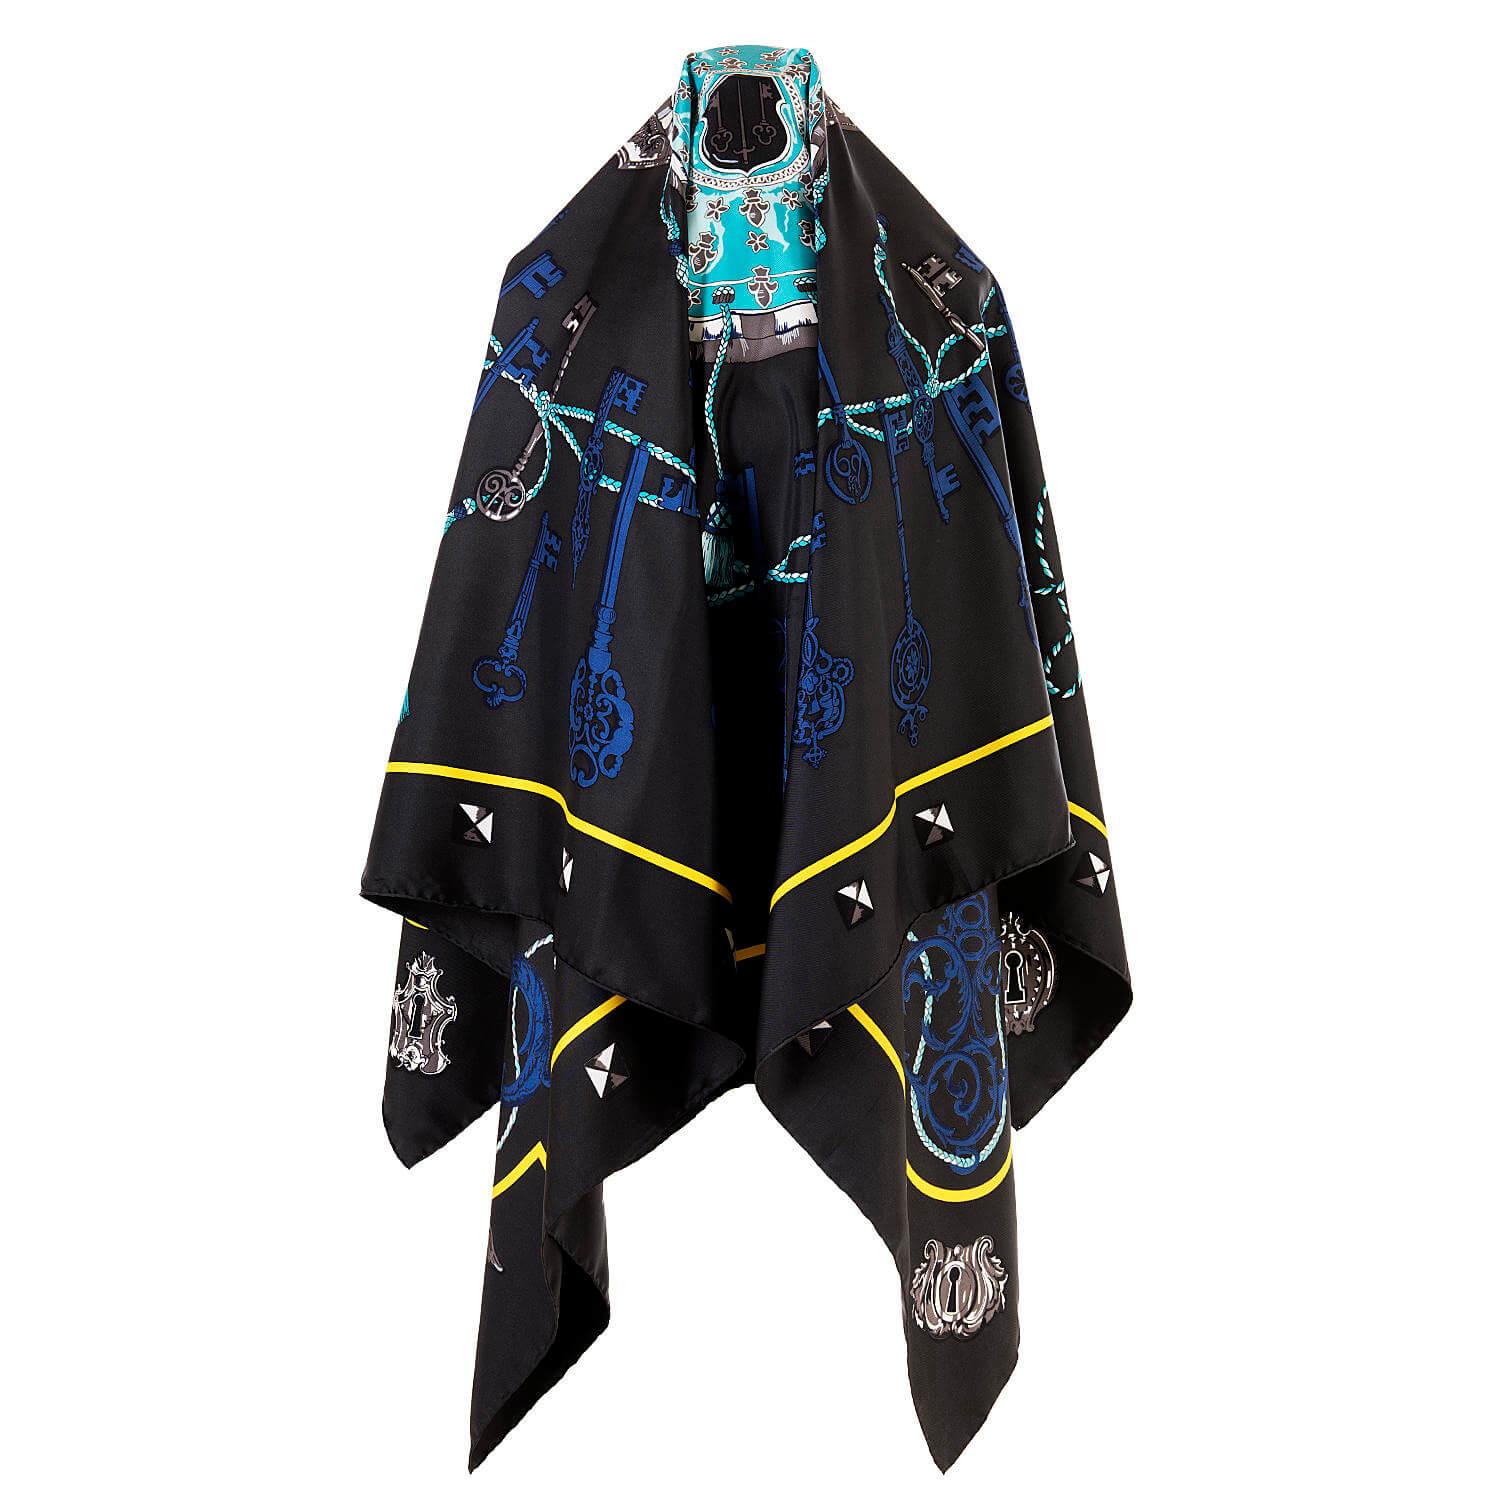 'Les Clefs' by Caty Latham is a truly beautiful Hermes silk shawl, scarf, in pristine 'store-fresh' condition. On a grey/black ground, overlaid with a design using turquoise, grey, brown, navy blue and yellow colours. This very elegant piece is a